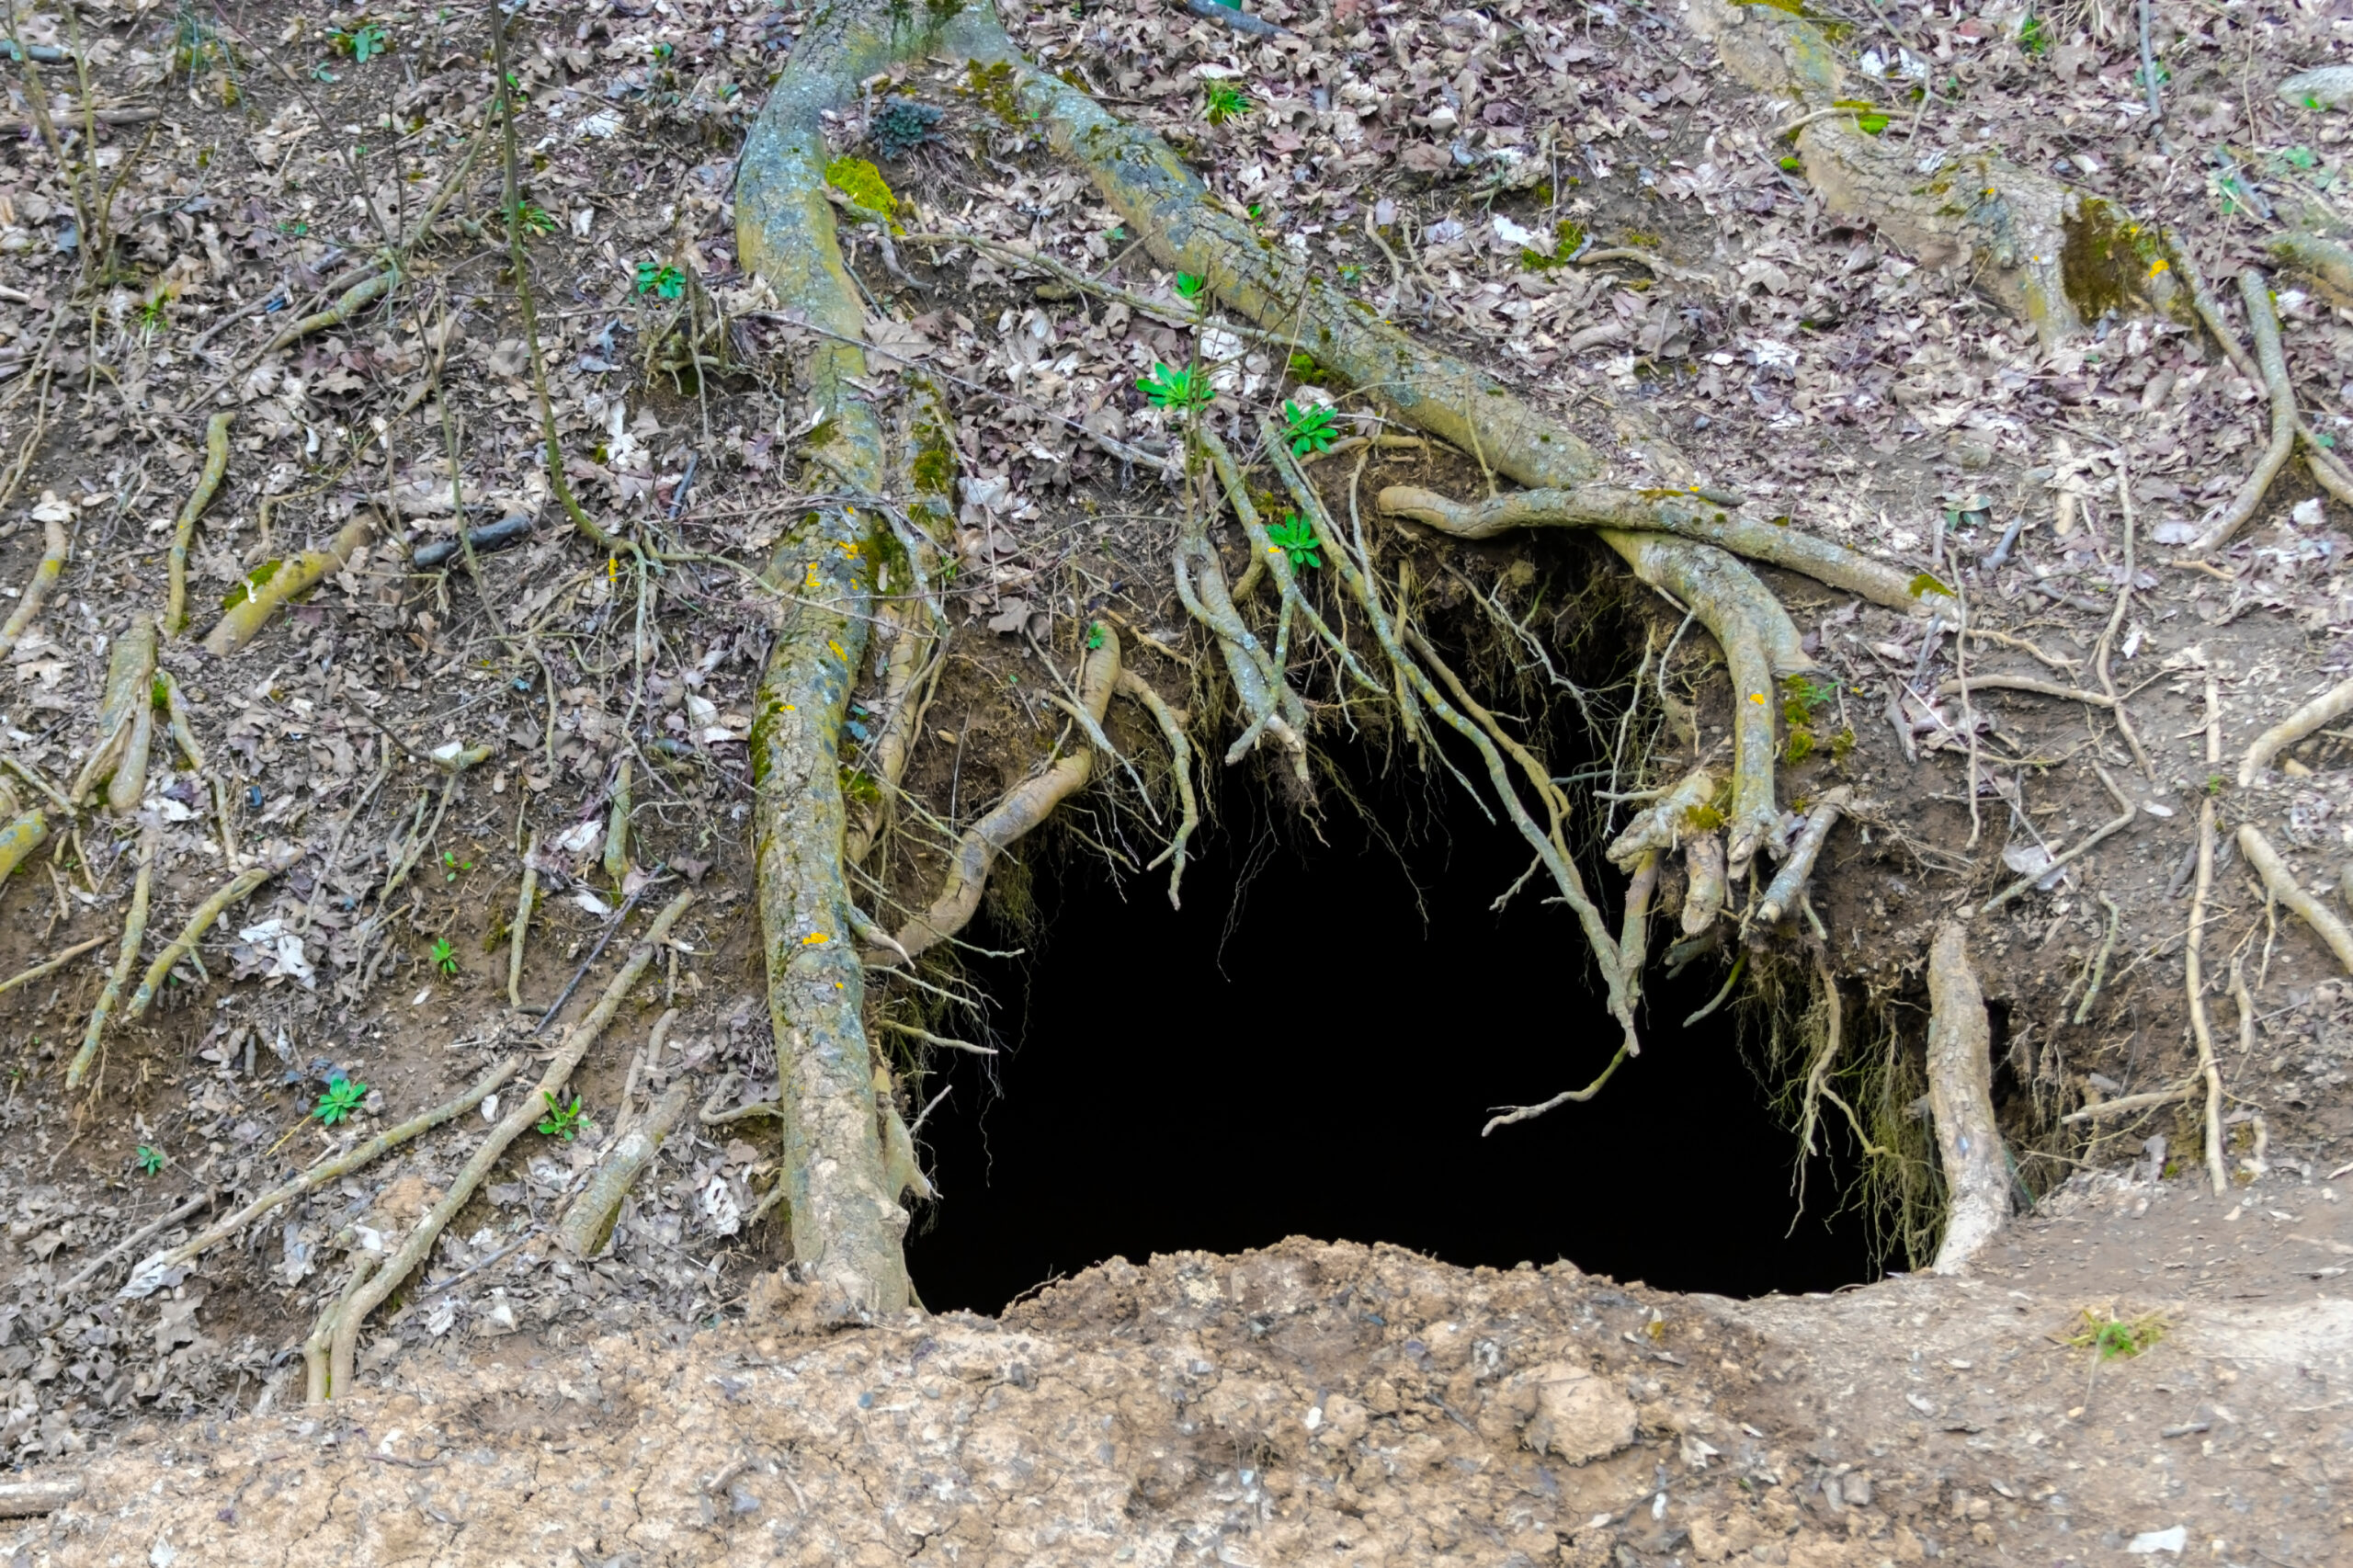 Bear hibernation is actually called a denning cycle, and it occurs in all kinds of dens, like this one under a tree root in a hillside.